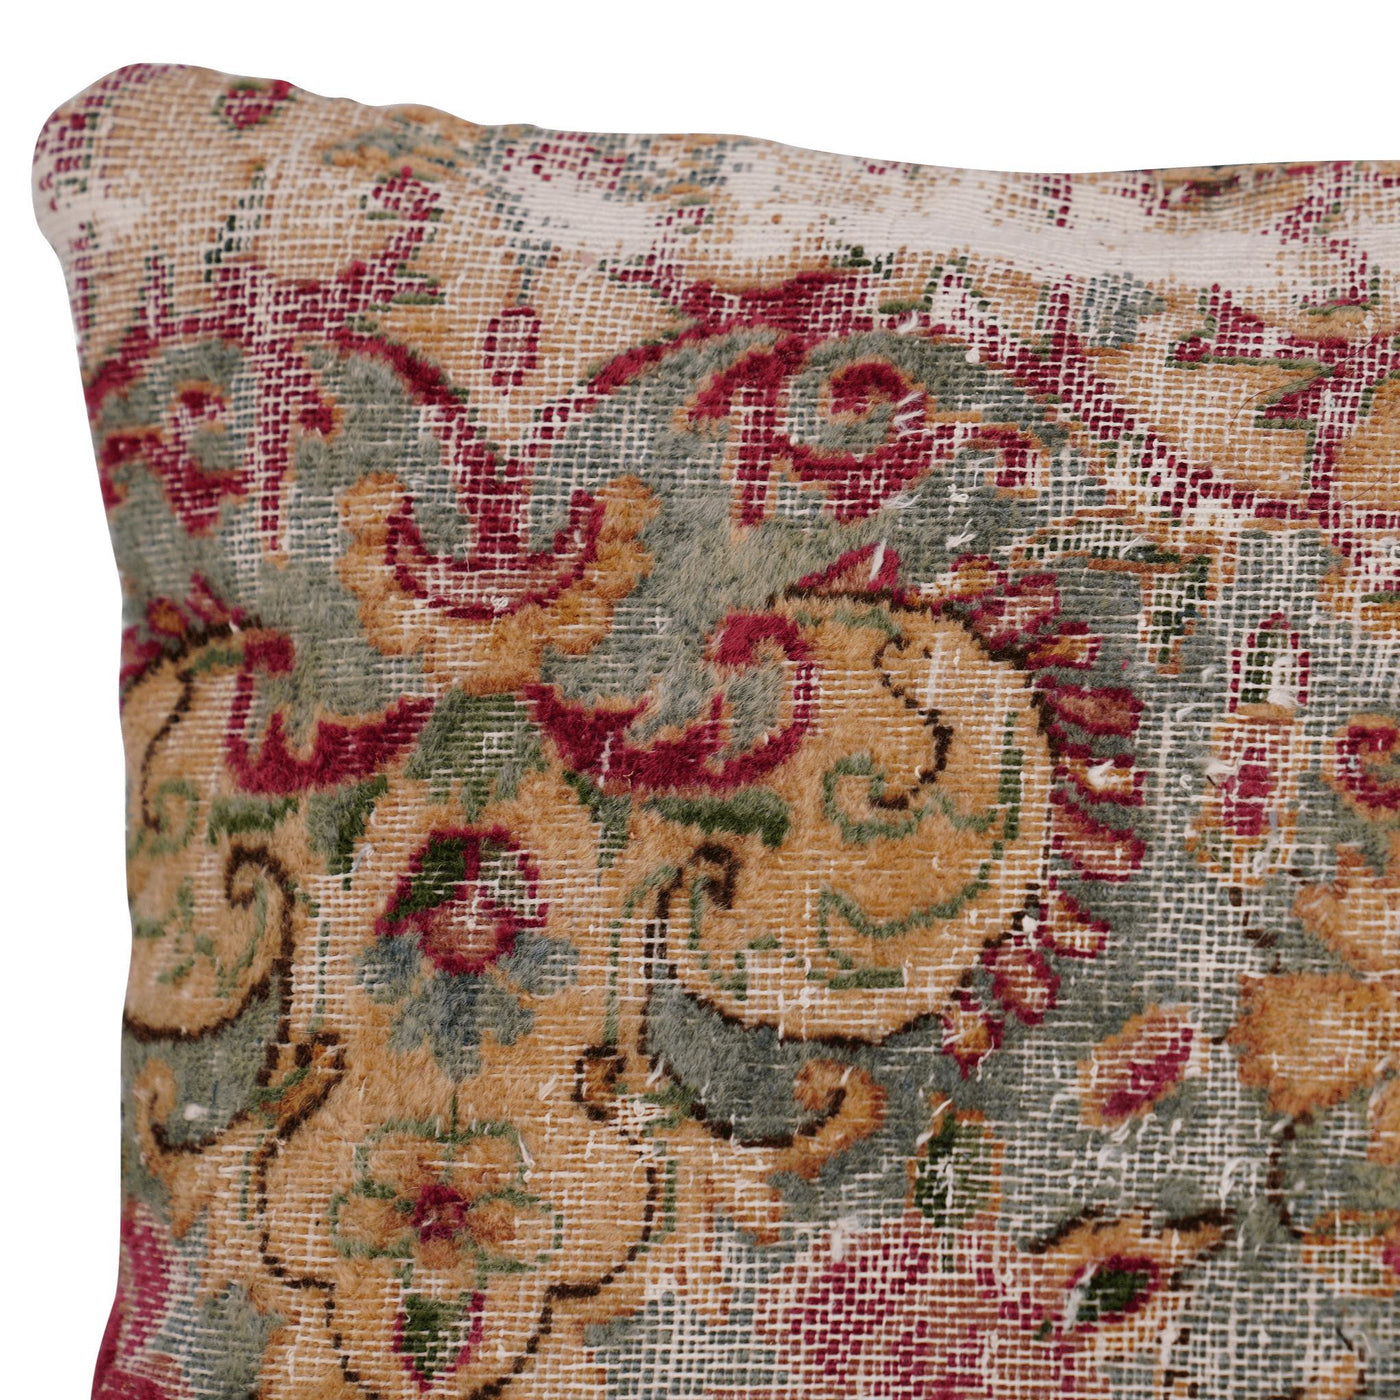 Canvello Antique Rug Sofa Cushion Covers With Zipper - 16"x24"